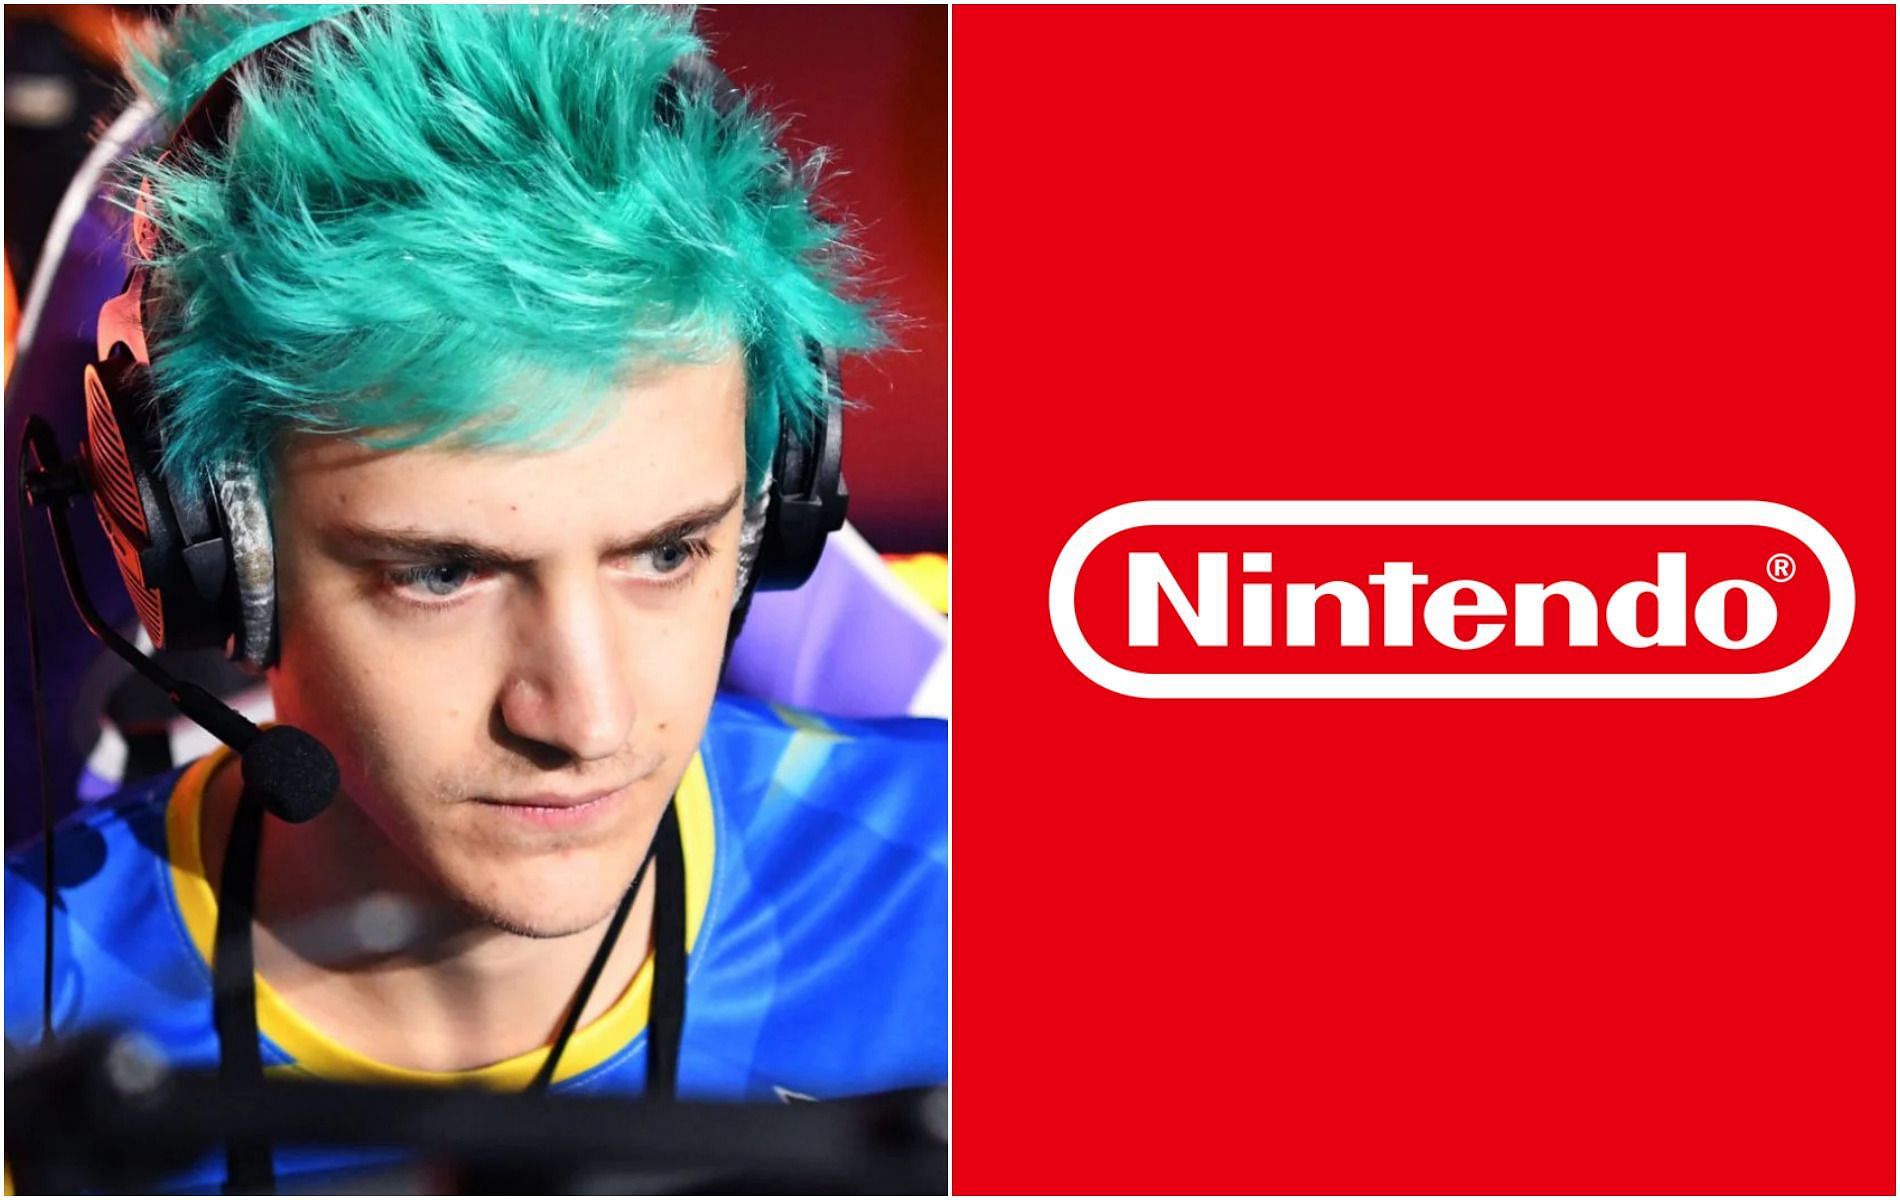 The renowned Fortnite streamer had seemingly reached out to Nintendo for a great opportunity (Images via Ninja/Nintendo)